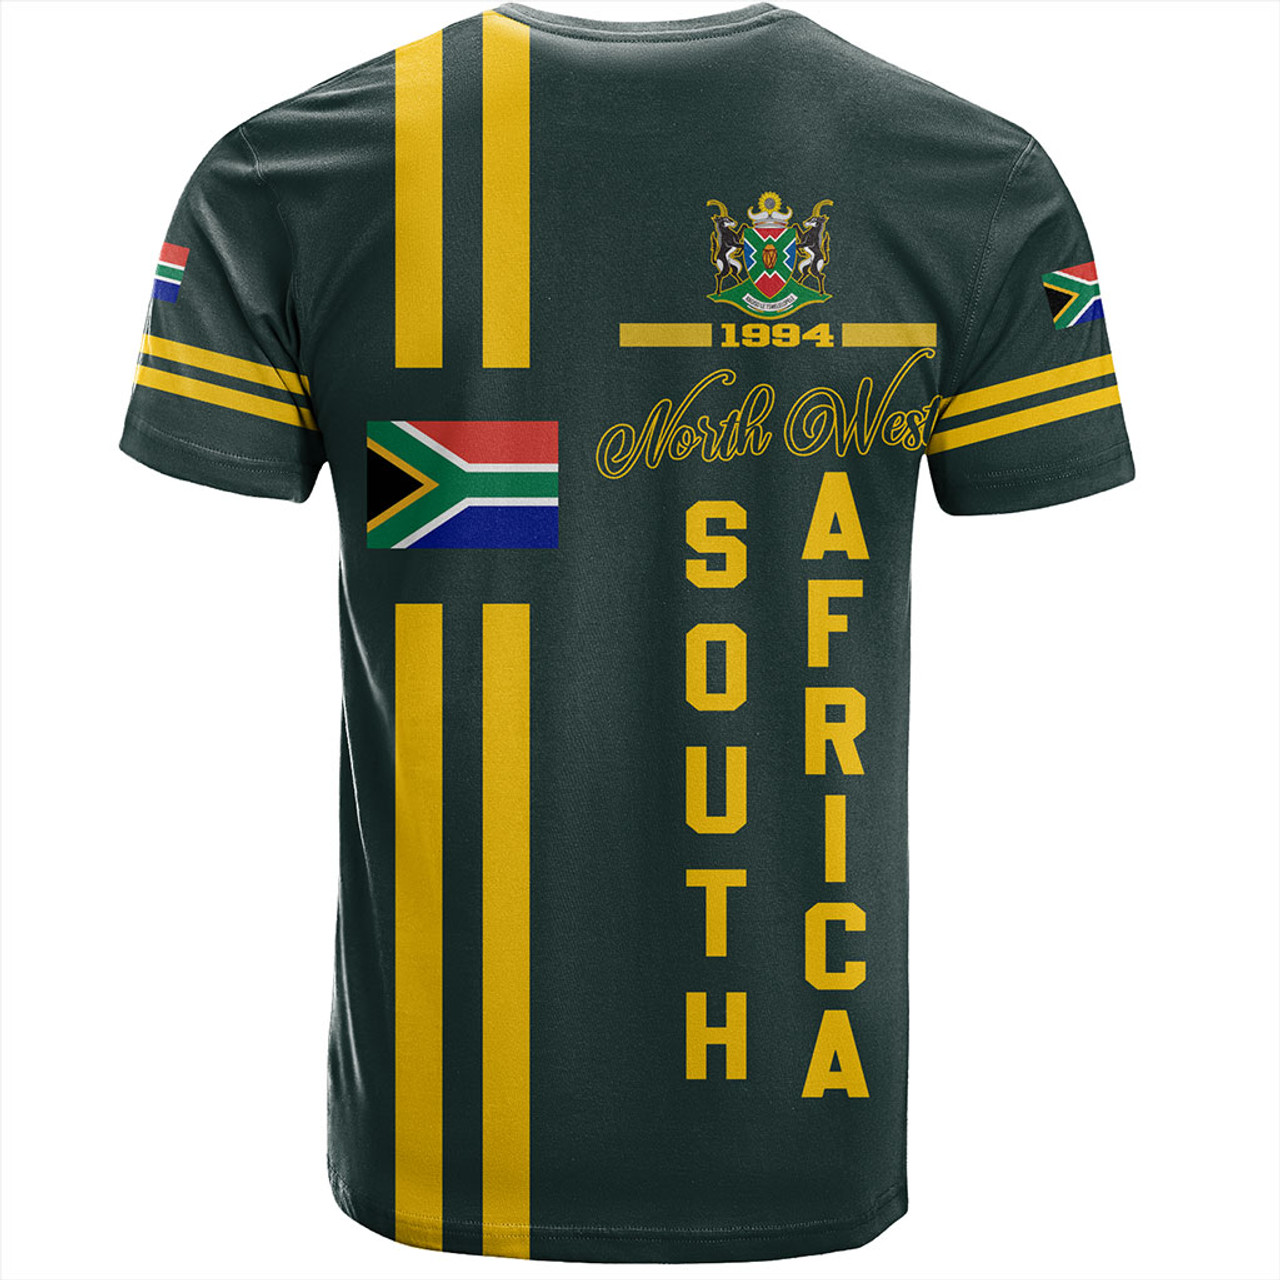 South Africa T-Shirt North West Springbook Animals